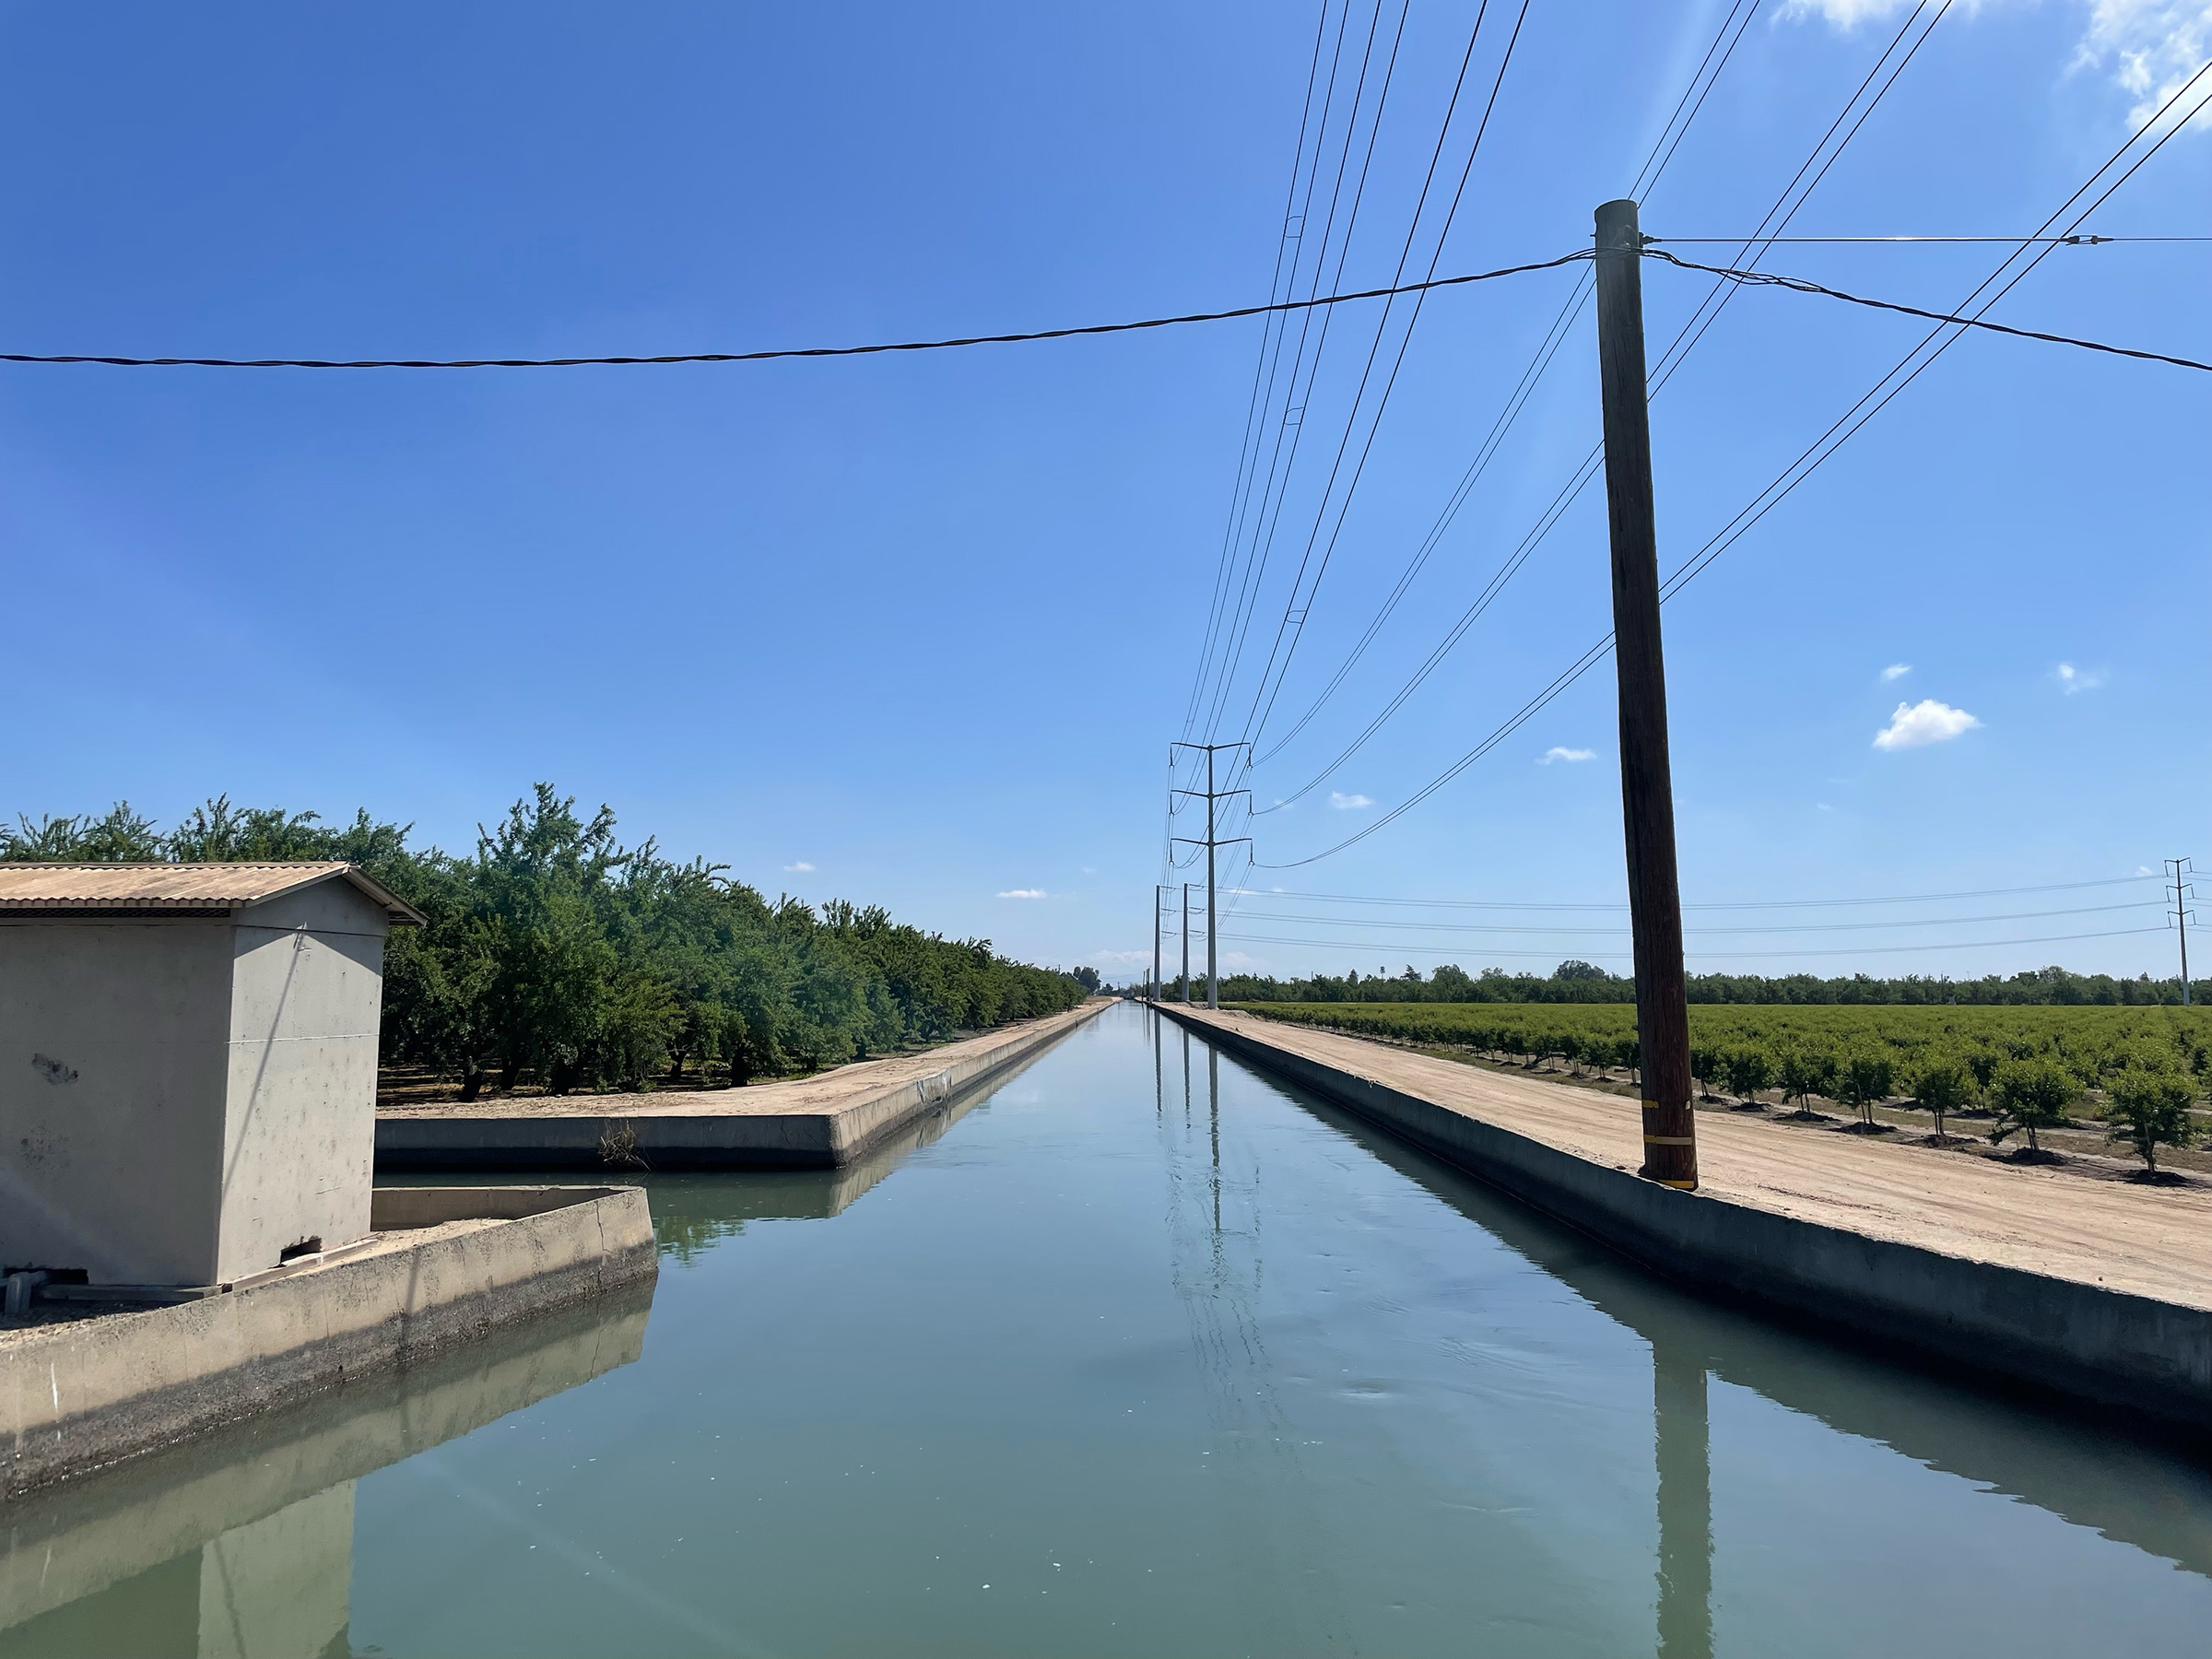 Narrow canal at site proposed for prototype in the Turlock Irrigation district. (Hugh Kuhn)